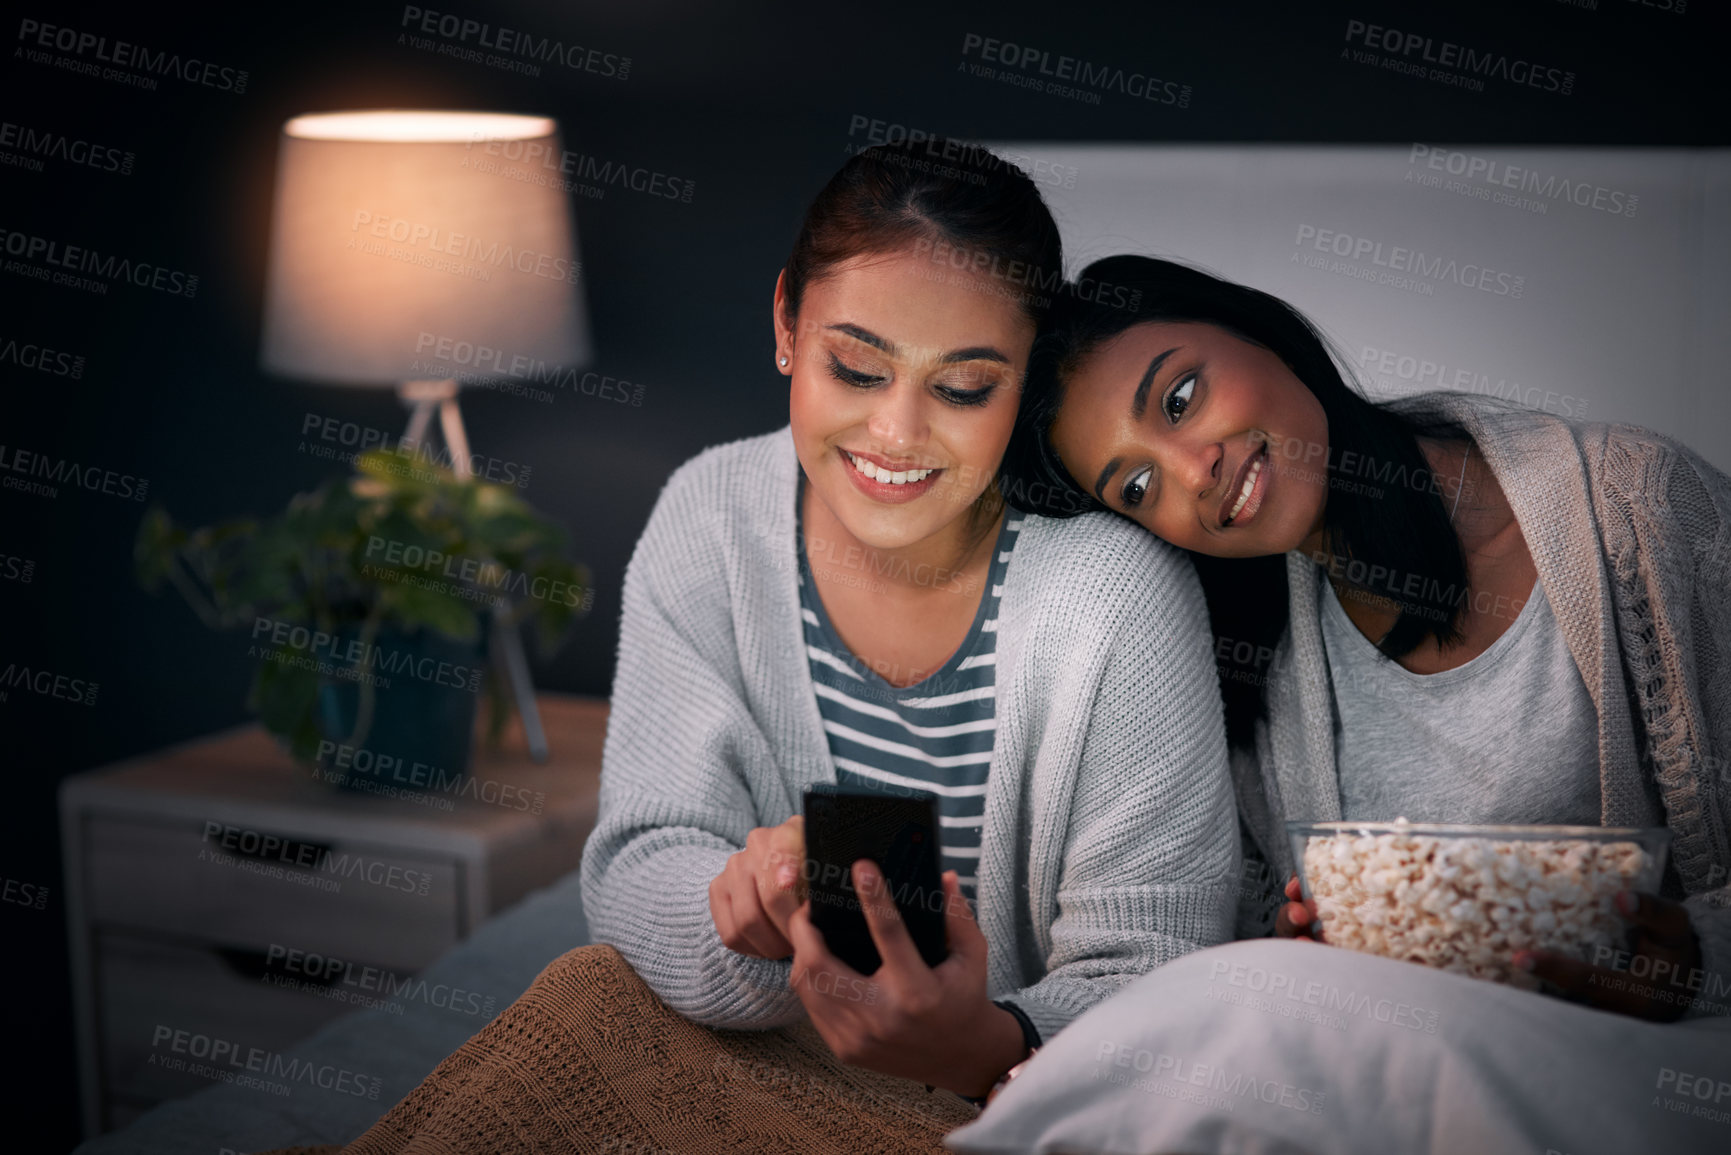 Buy stock photo Shot of a young woman showing her friend something on her cellphone while sitting together on a bed